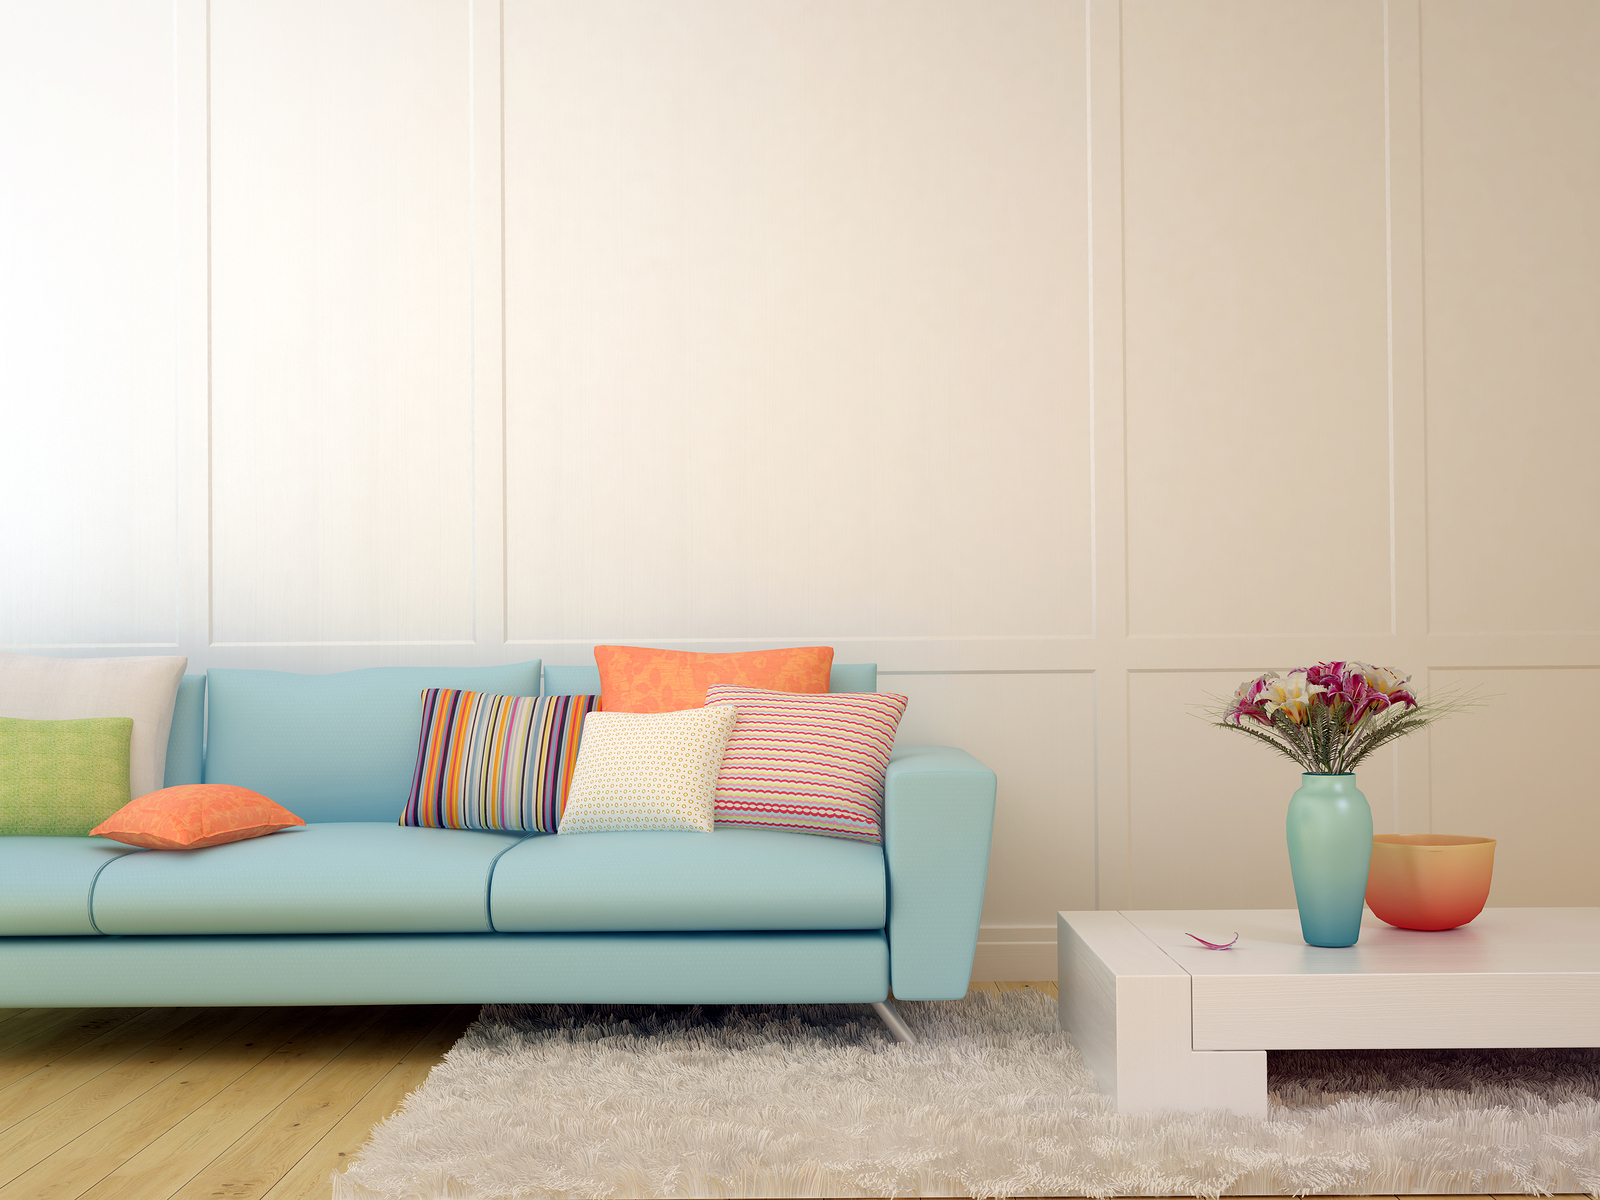 Bright composition of a light blue sofa with cushions and a white table on the white carpet